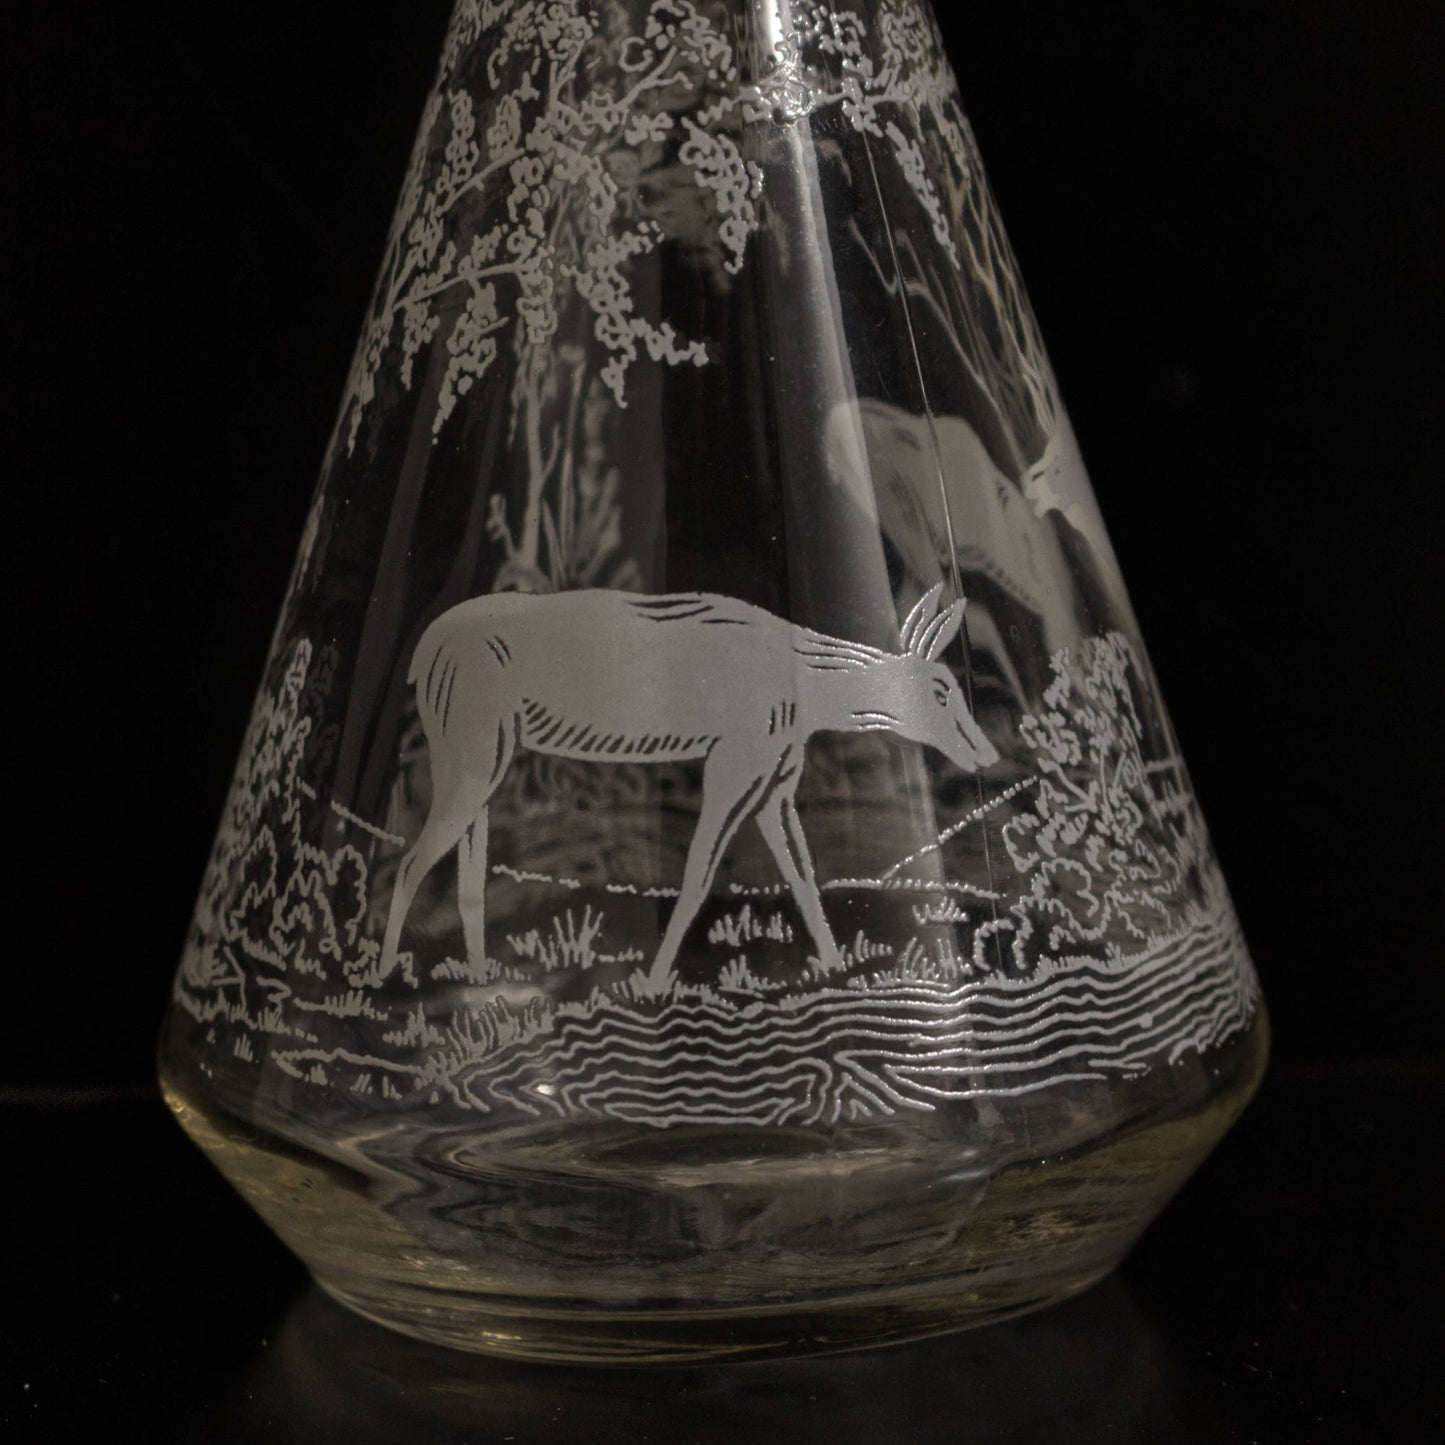 Vintage Glass Engraved Stag Design Decanter With Gold Detail